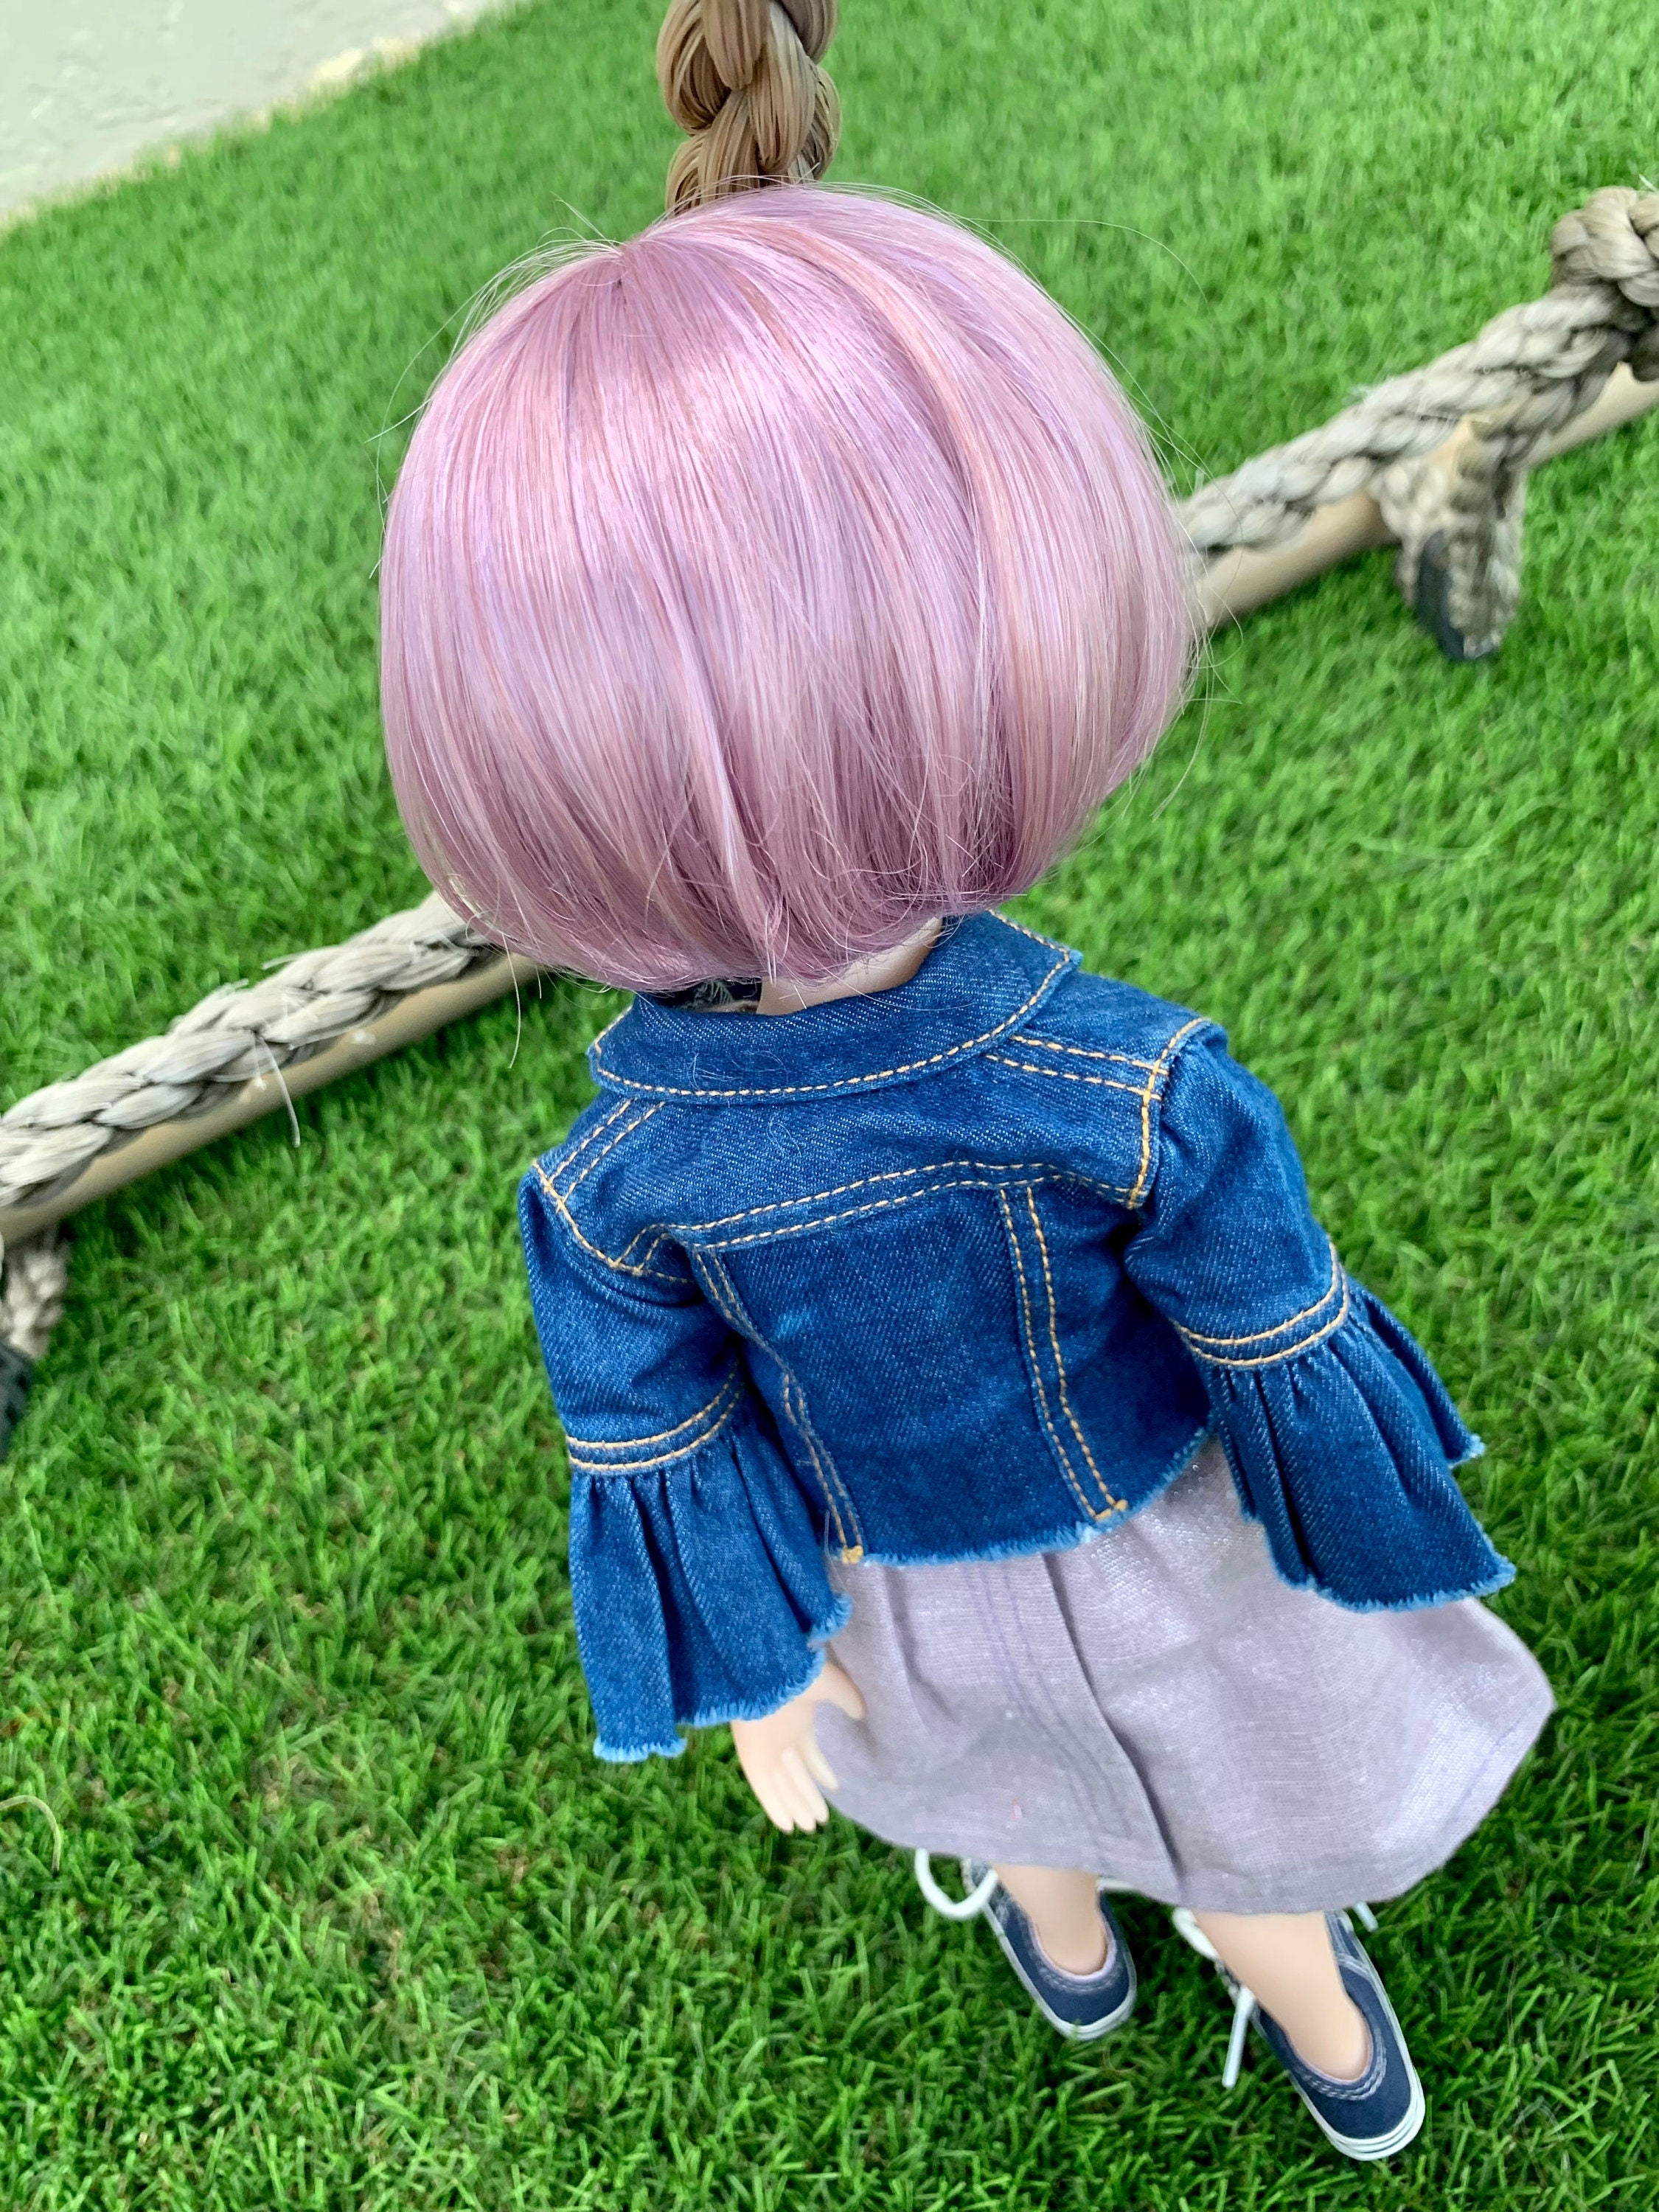 Custom doll WIG Exclusive Vegan Mohair-fits 9-10" head size Kaye Wiggs, RRFF, wellie wishers, bjd, Girl for All Time"Loose Fit"